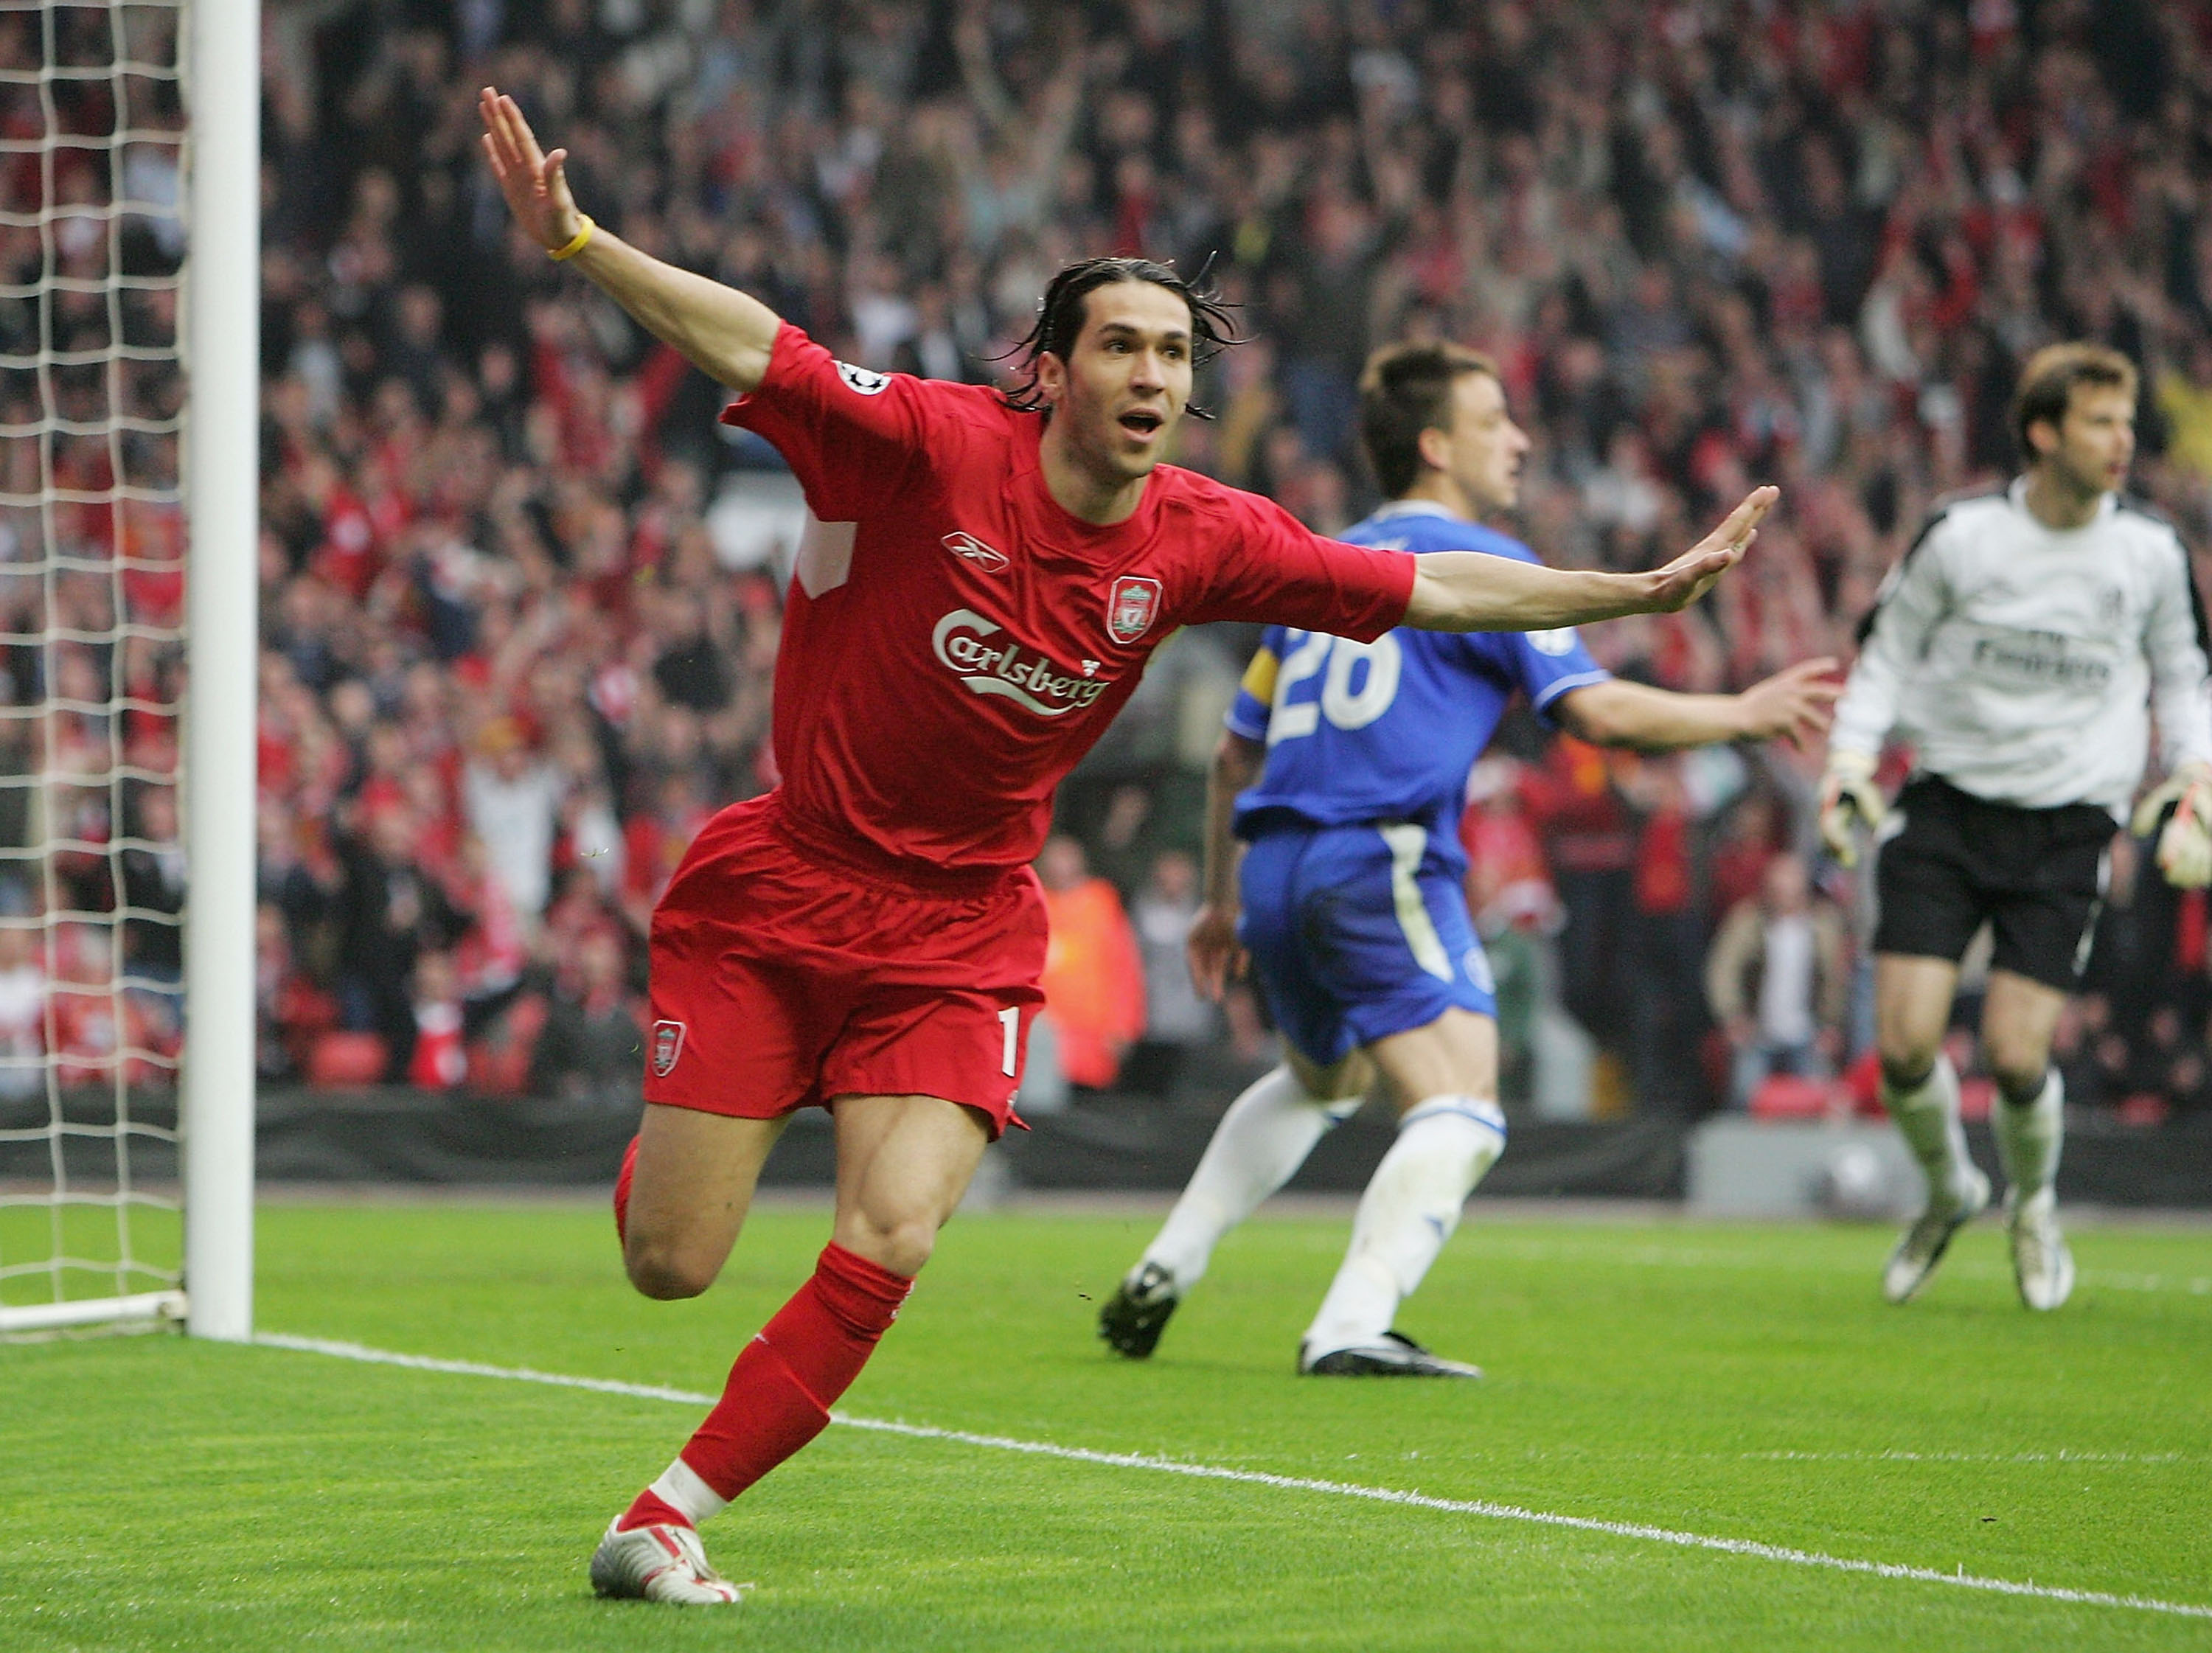 LIVERPOOL, ENGLAND - MAY 03: Luis Garcia of Liverpool celebrates scoring the opening goal during the UEFA Champions League semi-final second leg match between Liverpool and Chelsea at Anfield on May 3, 2005 in Liverpool, England. (Photo by Laurence Griffi